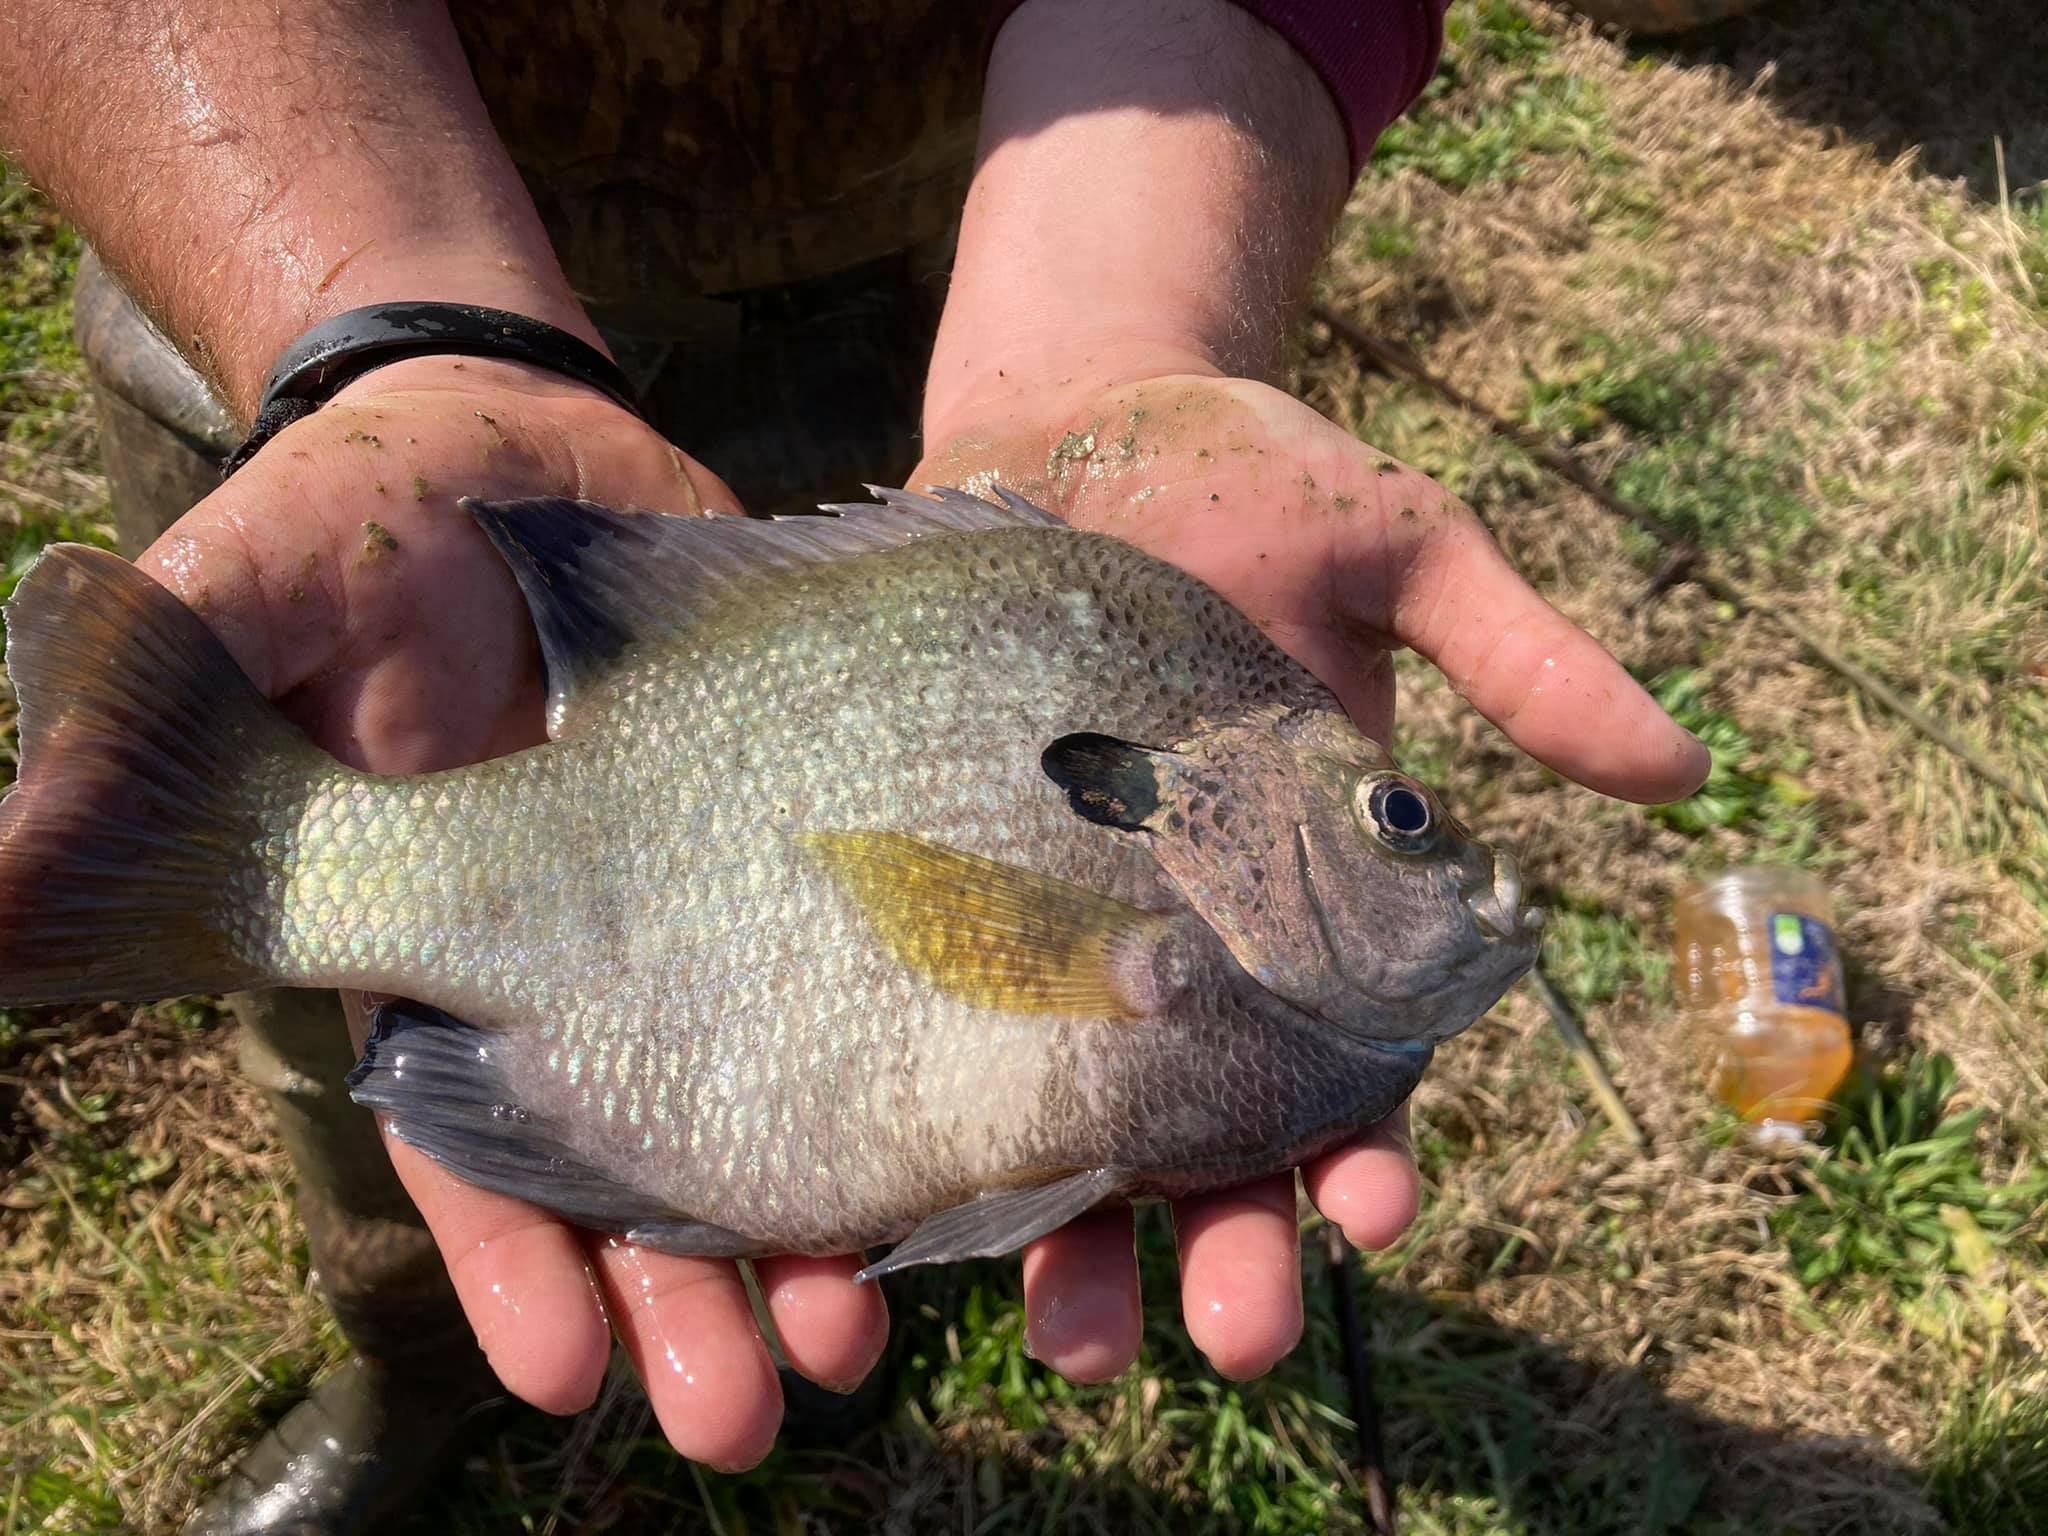 Check out this giant Coppernose Bluegill. Coppernose get bigger and train to feed better than native bluegill.